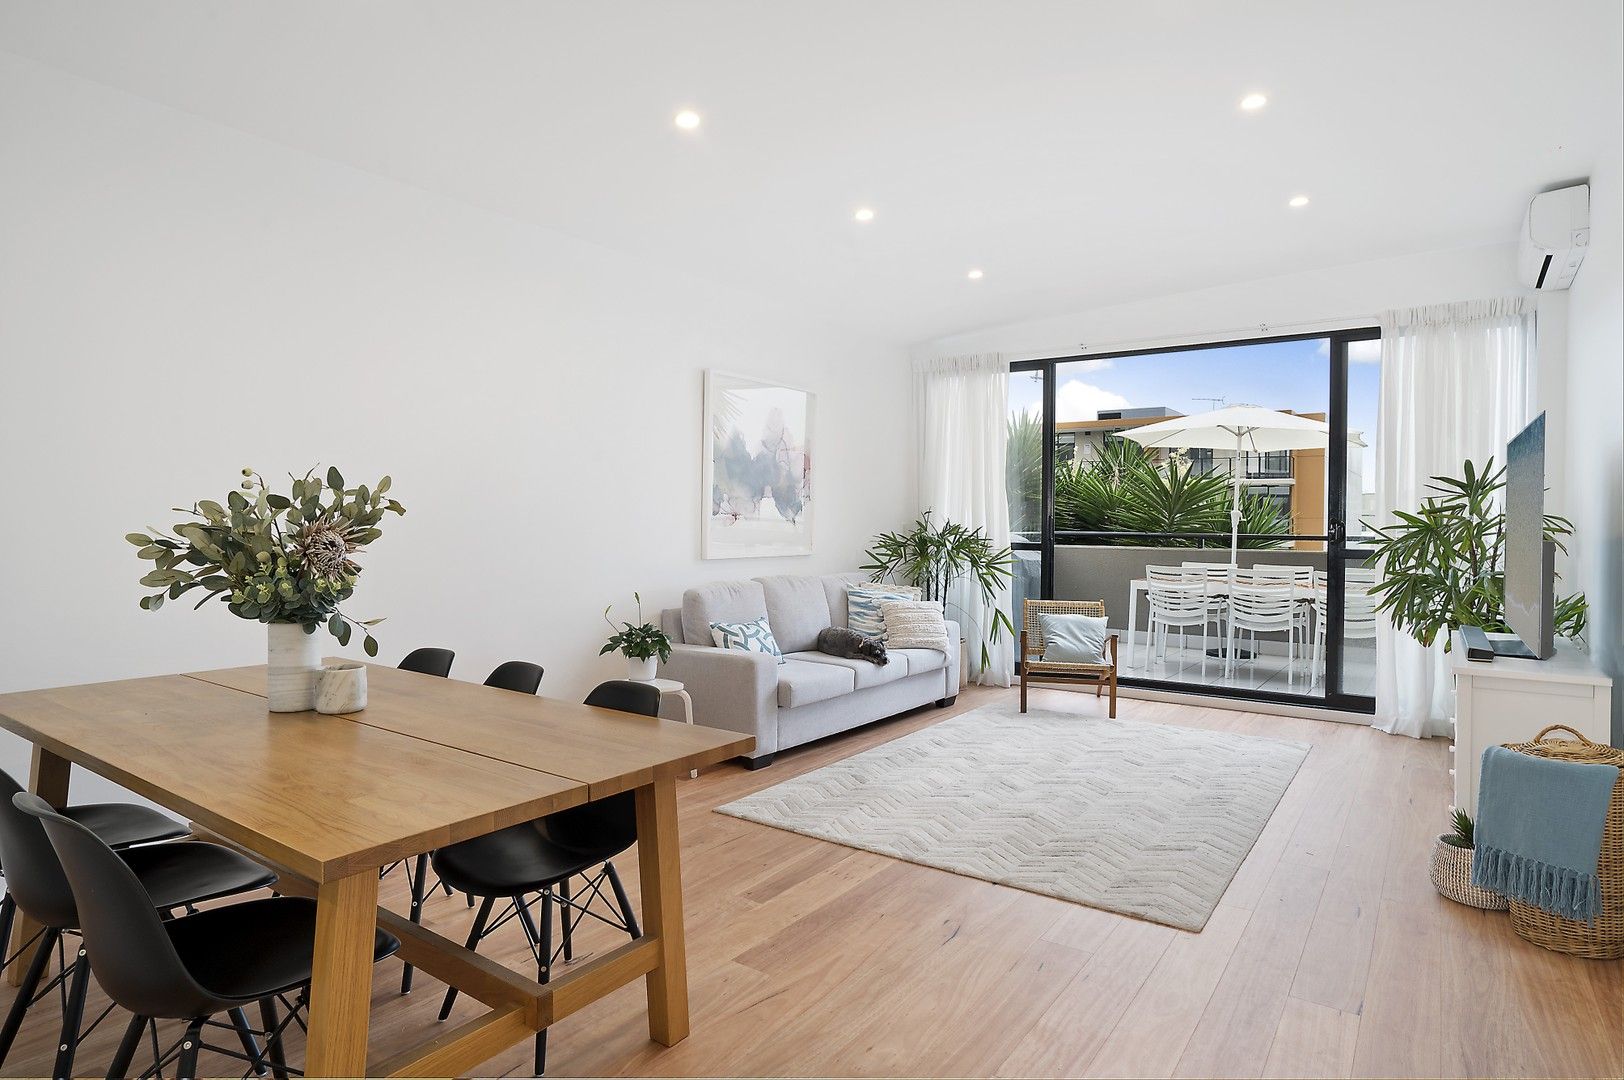 2 bedrooms Apartment / Unit / Flat in 21/23 Howard Avenue DEE WHY NSW, 2099